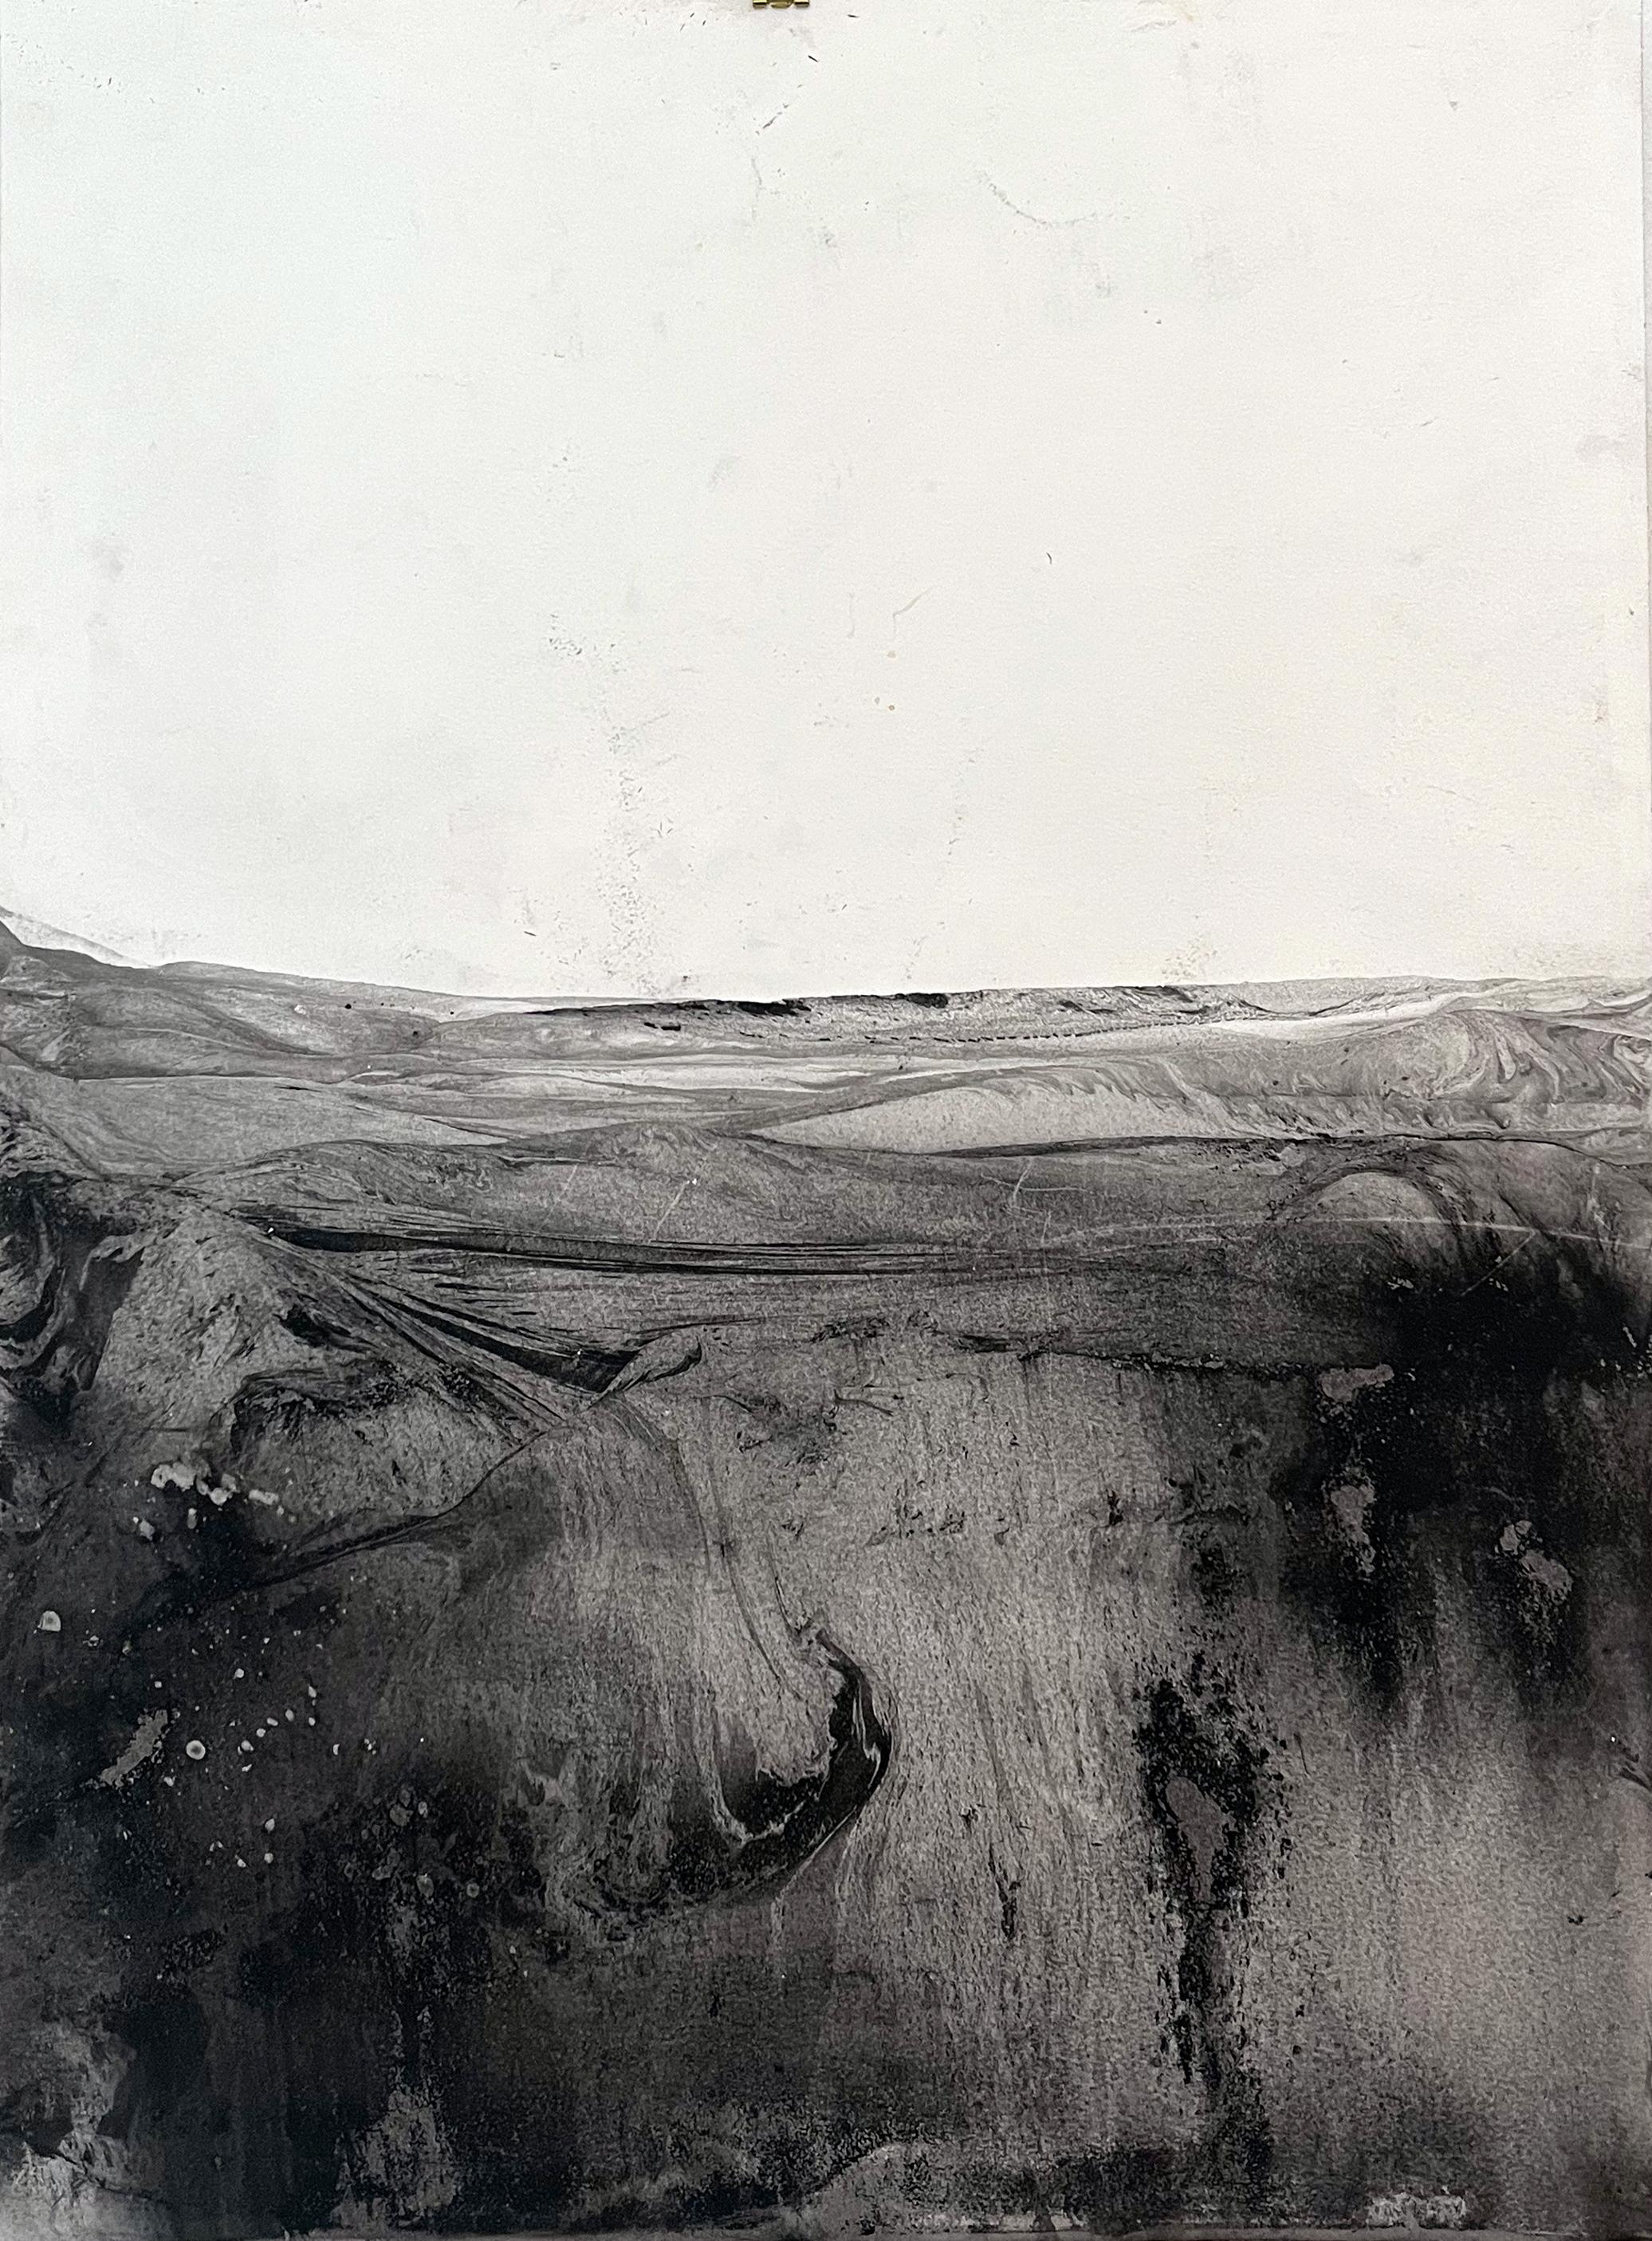 Abstract Painting Marilina Marchica - « Paysage B/W », dessin contemporain de grande taille